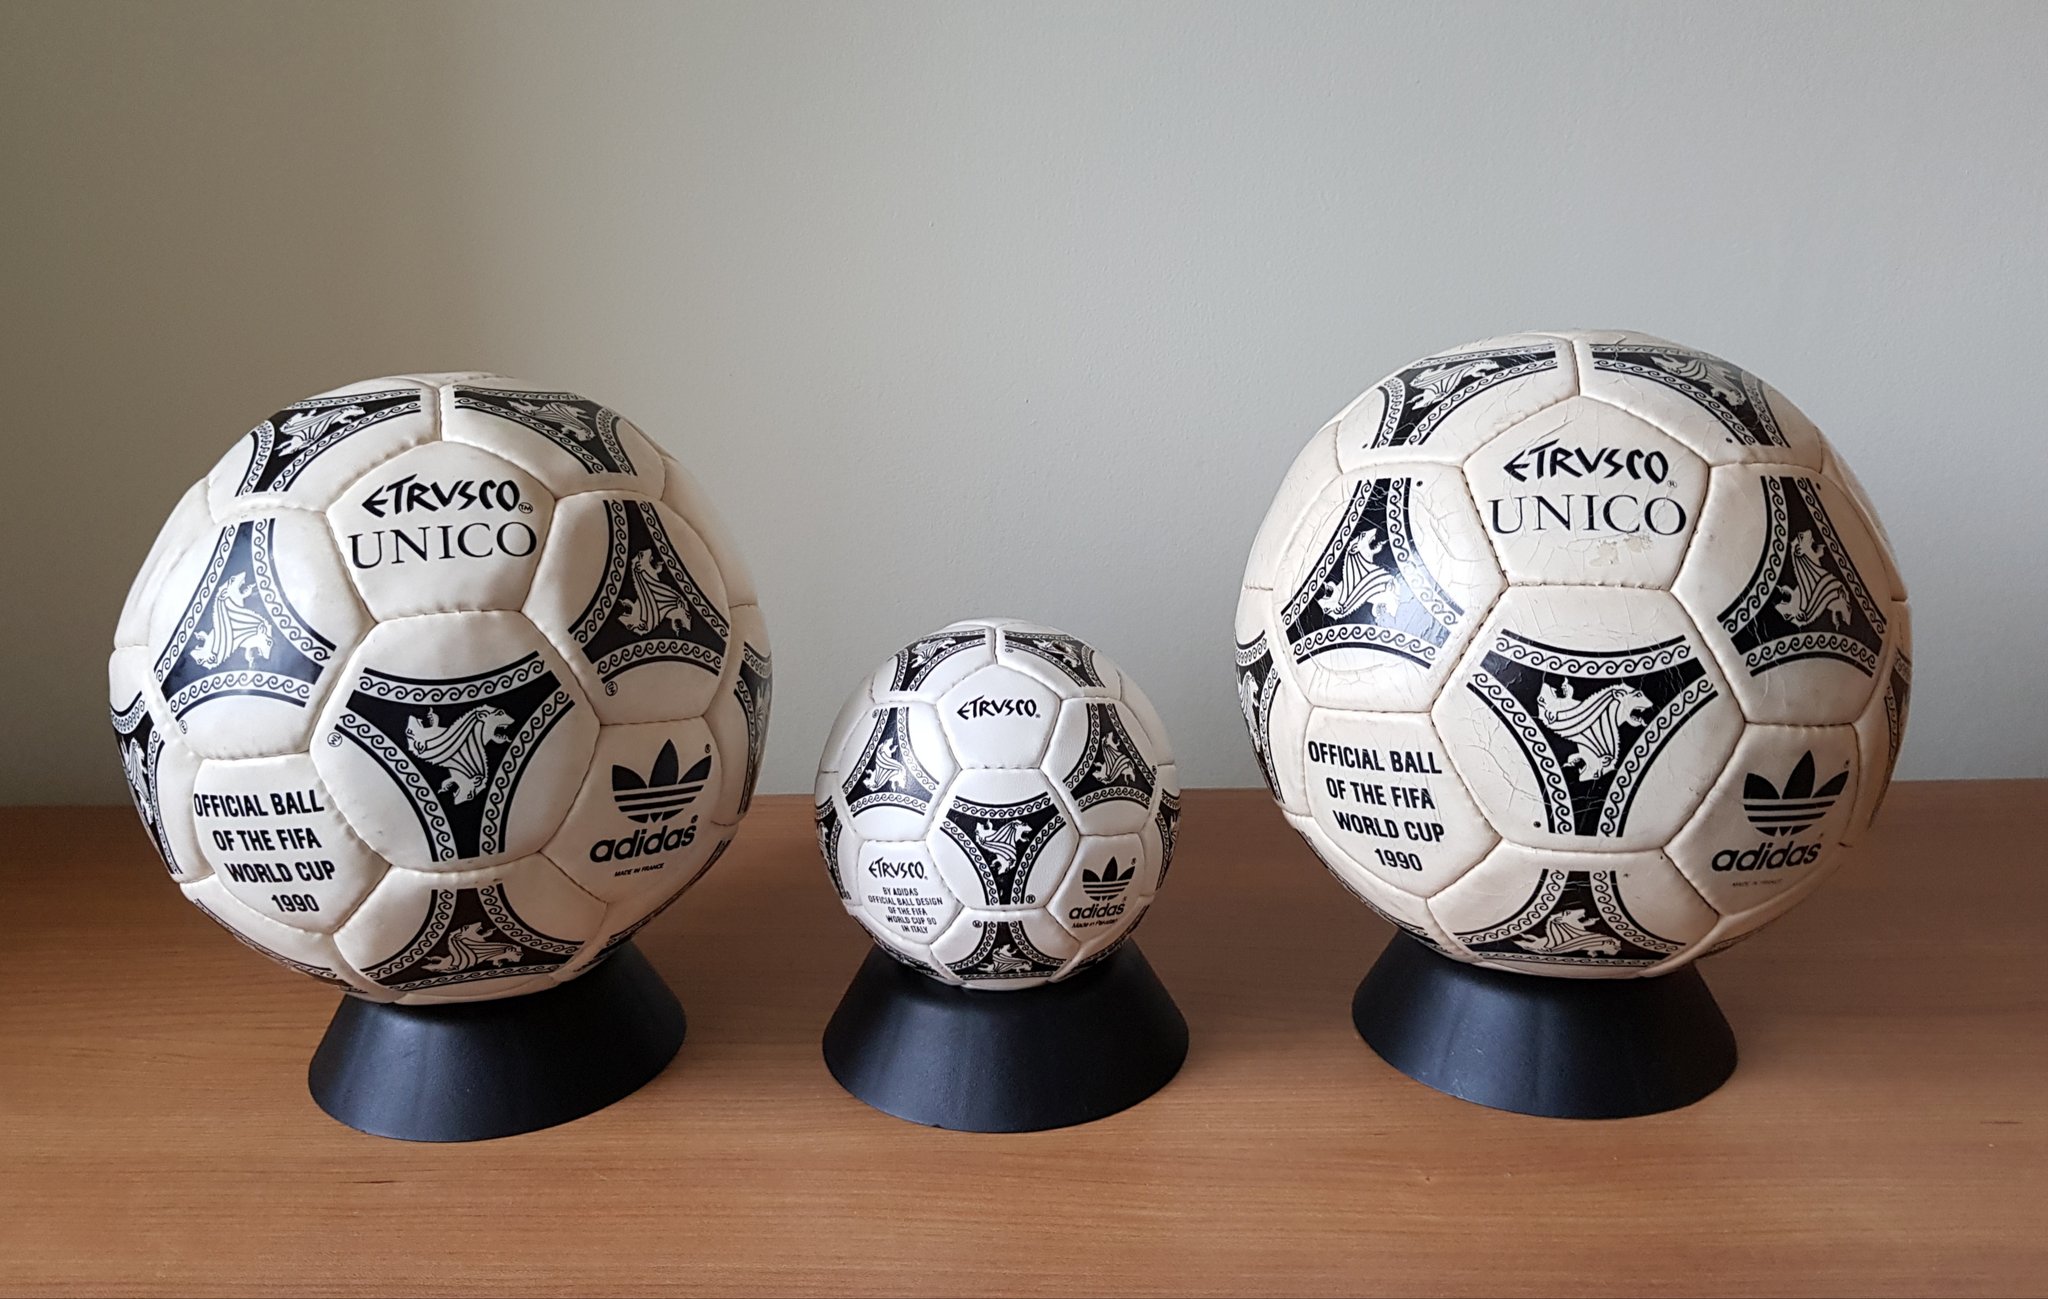 Rob Filby on Twitter: Etrusco - World Cup Official Match Ball Made in France. (R) version, TM version and original mini ball #etrusco #etruscounico #wmball #worldcupball #1990worldcup #italia90 #italy90 #